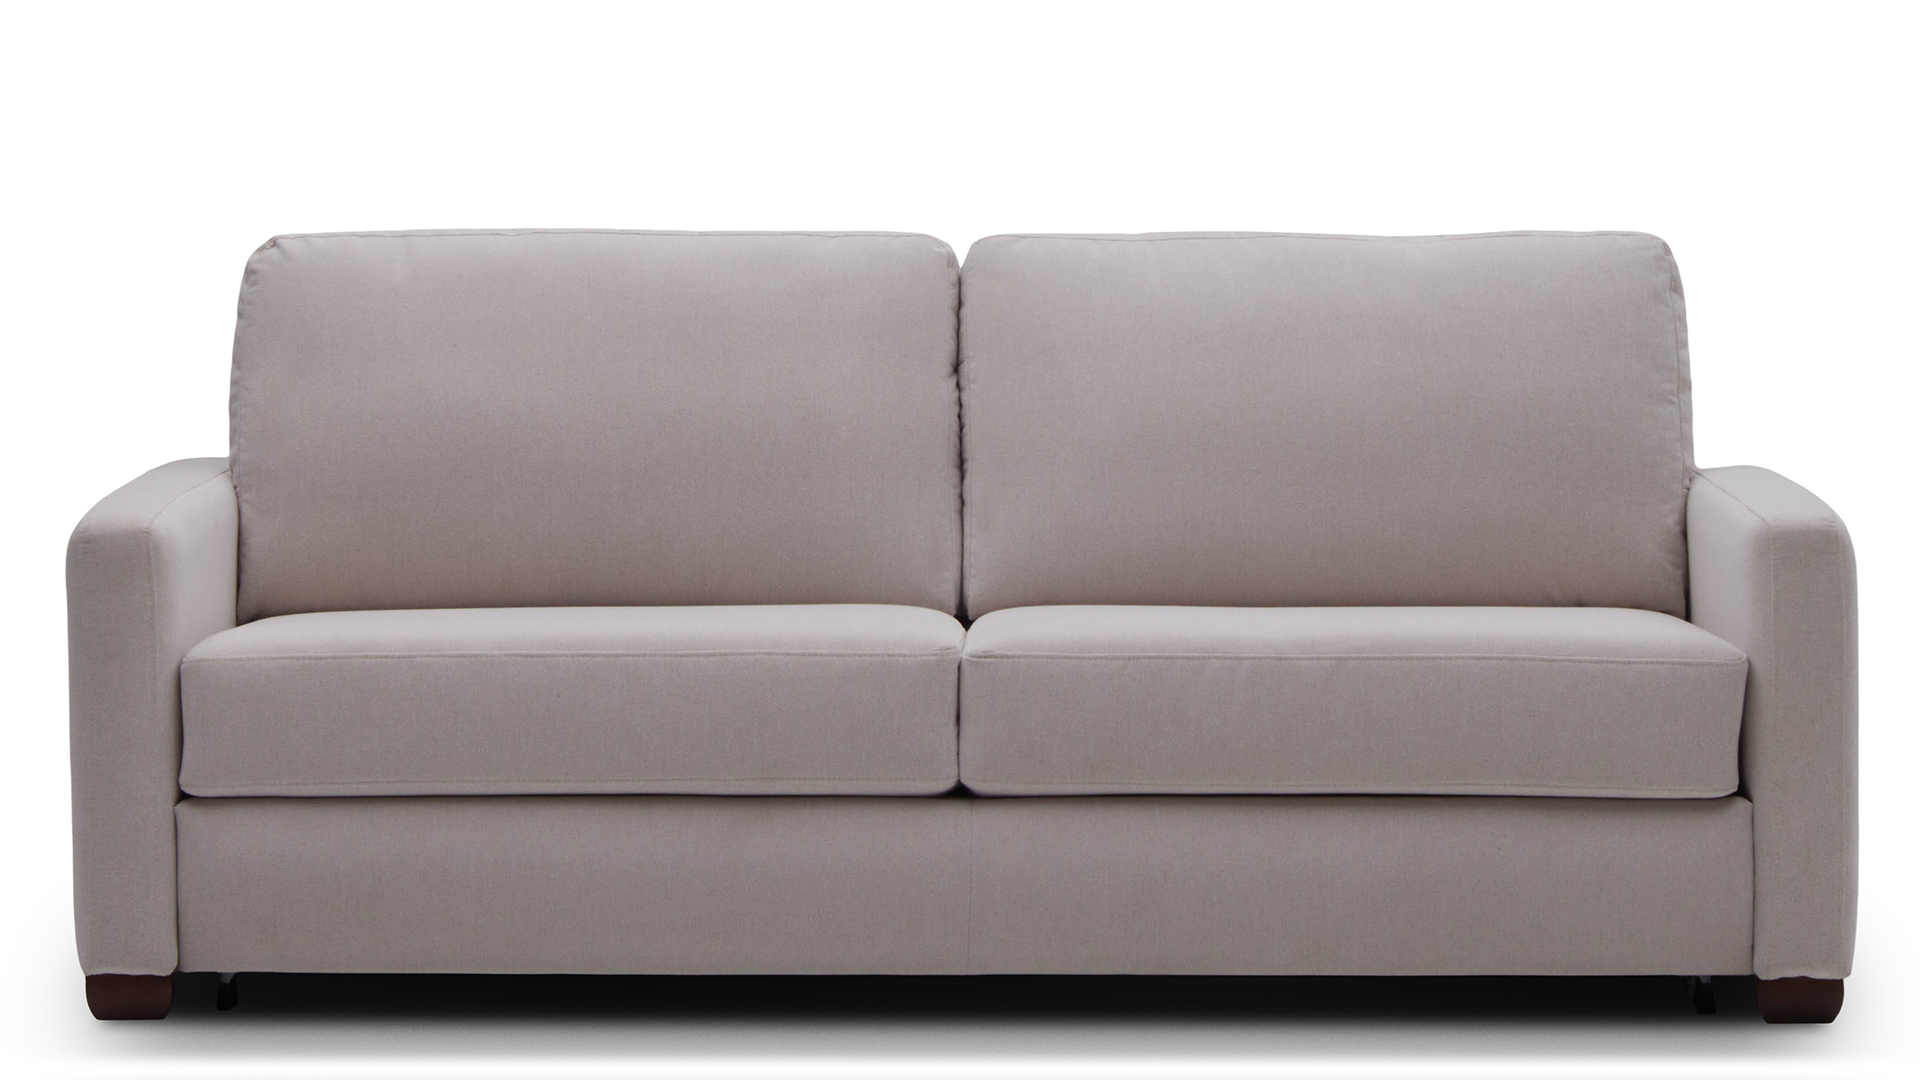 Sofa with sleeping function Space 160